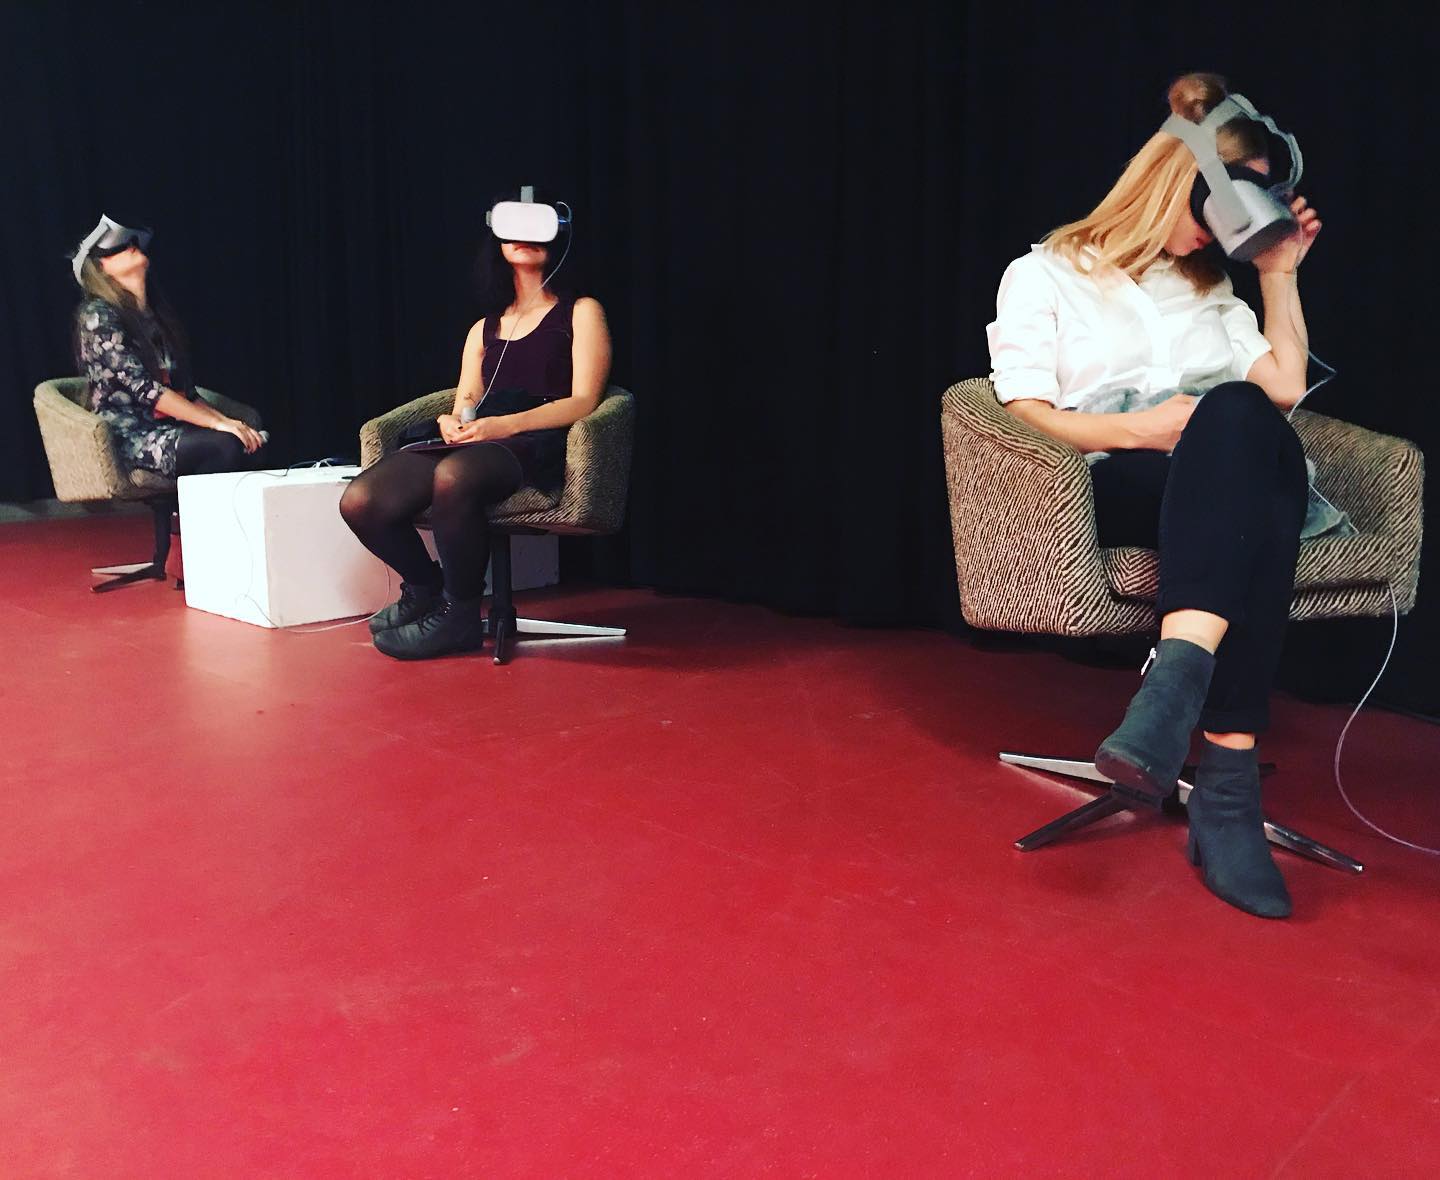 three girls wearing VR headsets sitting in armchairs
              